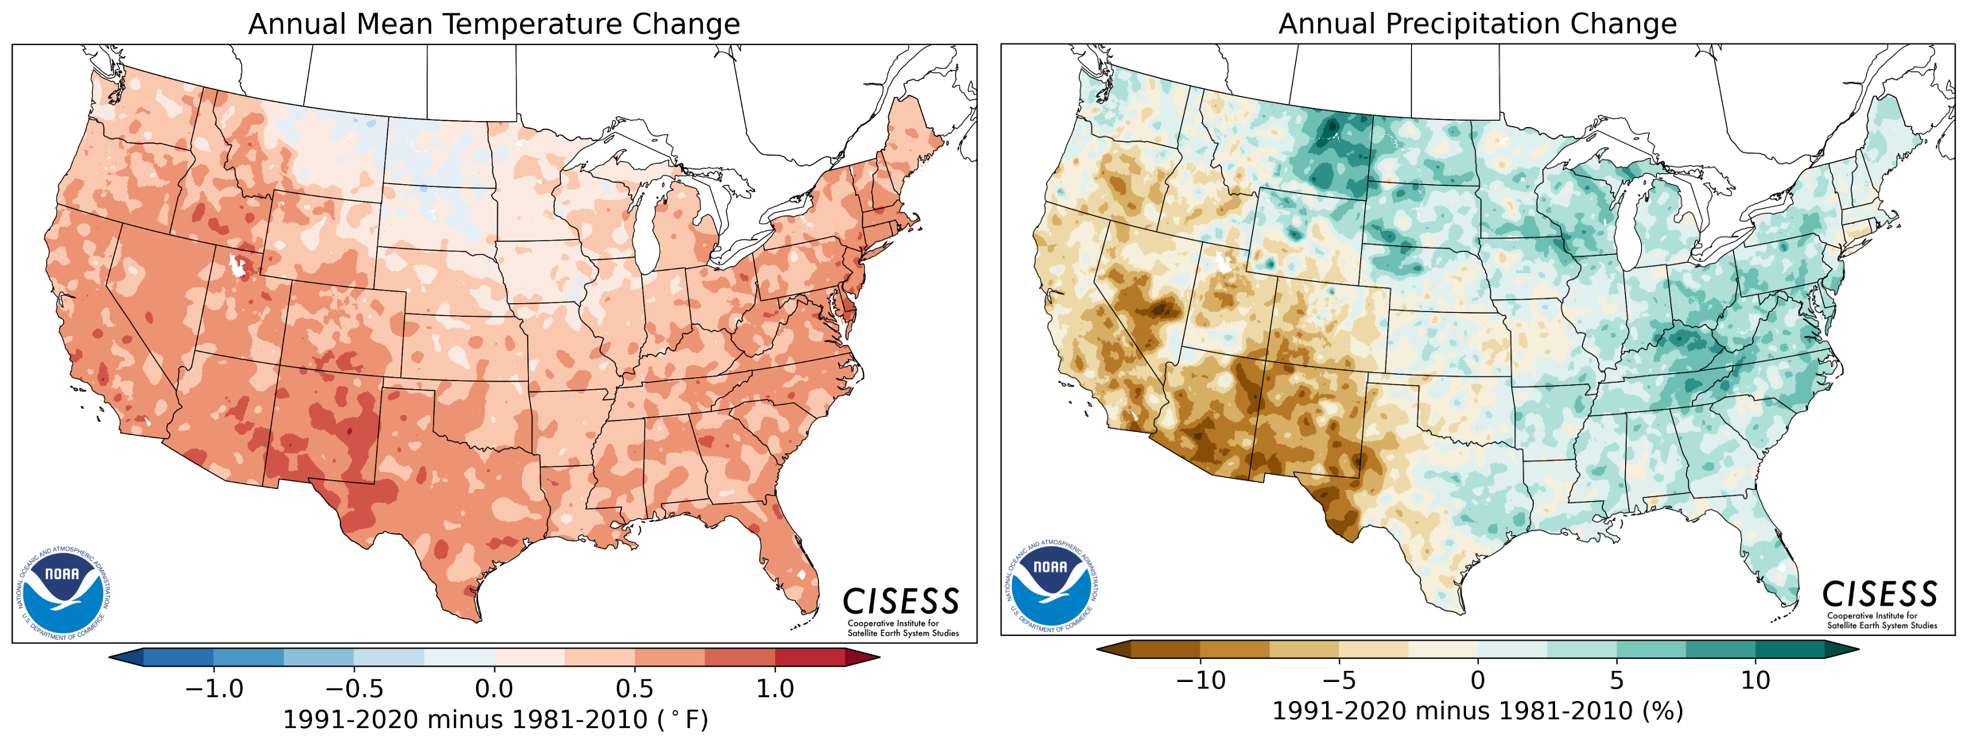 The change in contiguous U.S. annual mean temperatures (°F) and precipitation totals (% change) between the new set of Climate Normals, 1991-2020 (most recent last 3 decades), and the previous set of Normals, 1981-2010.